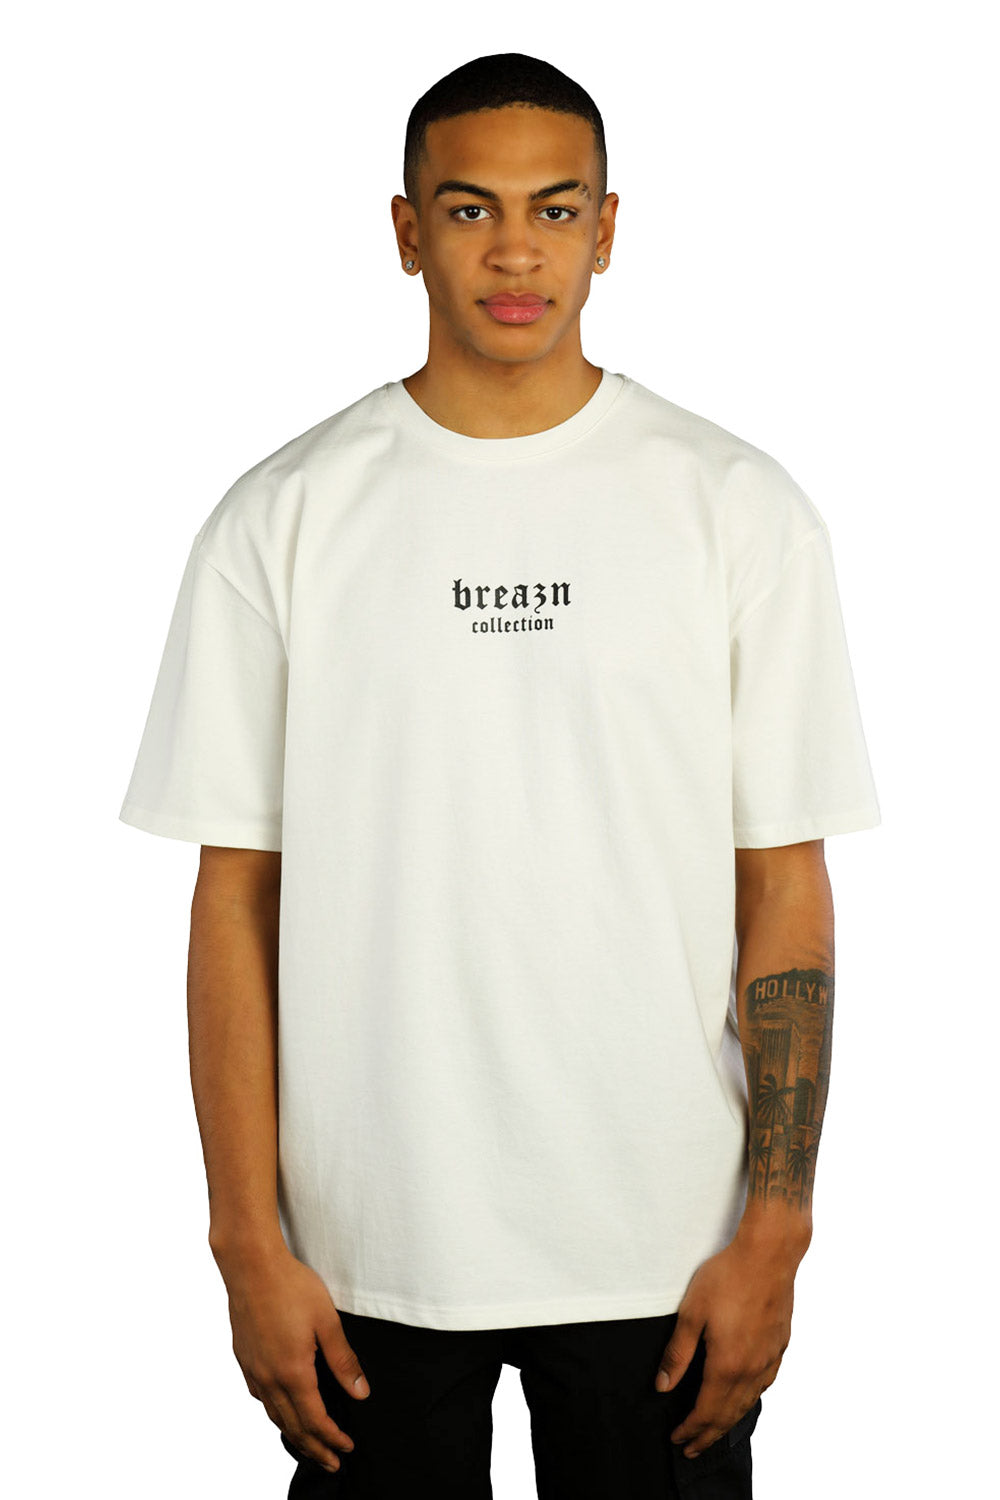 Breazn (white) Print Front – T-Shirt Collection